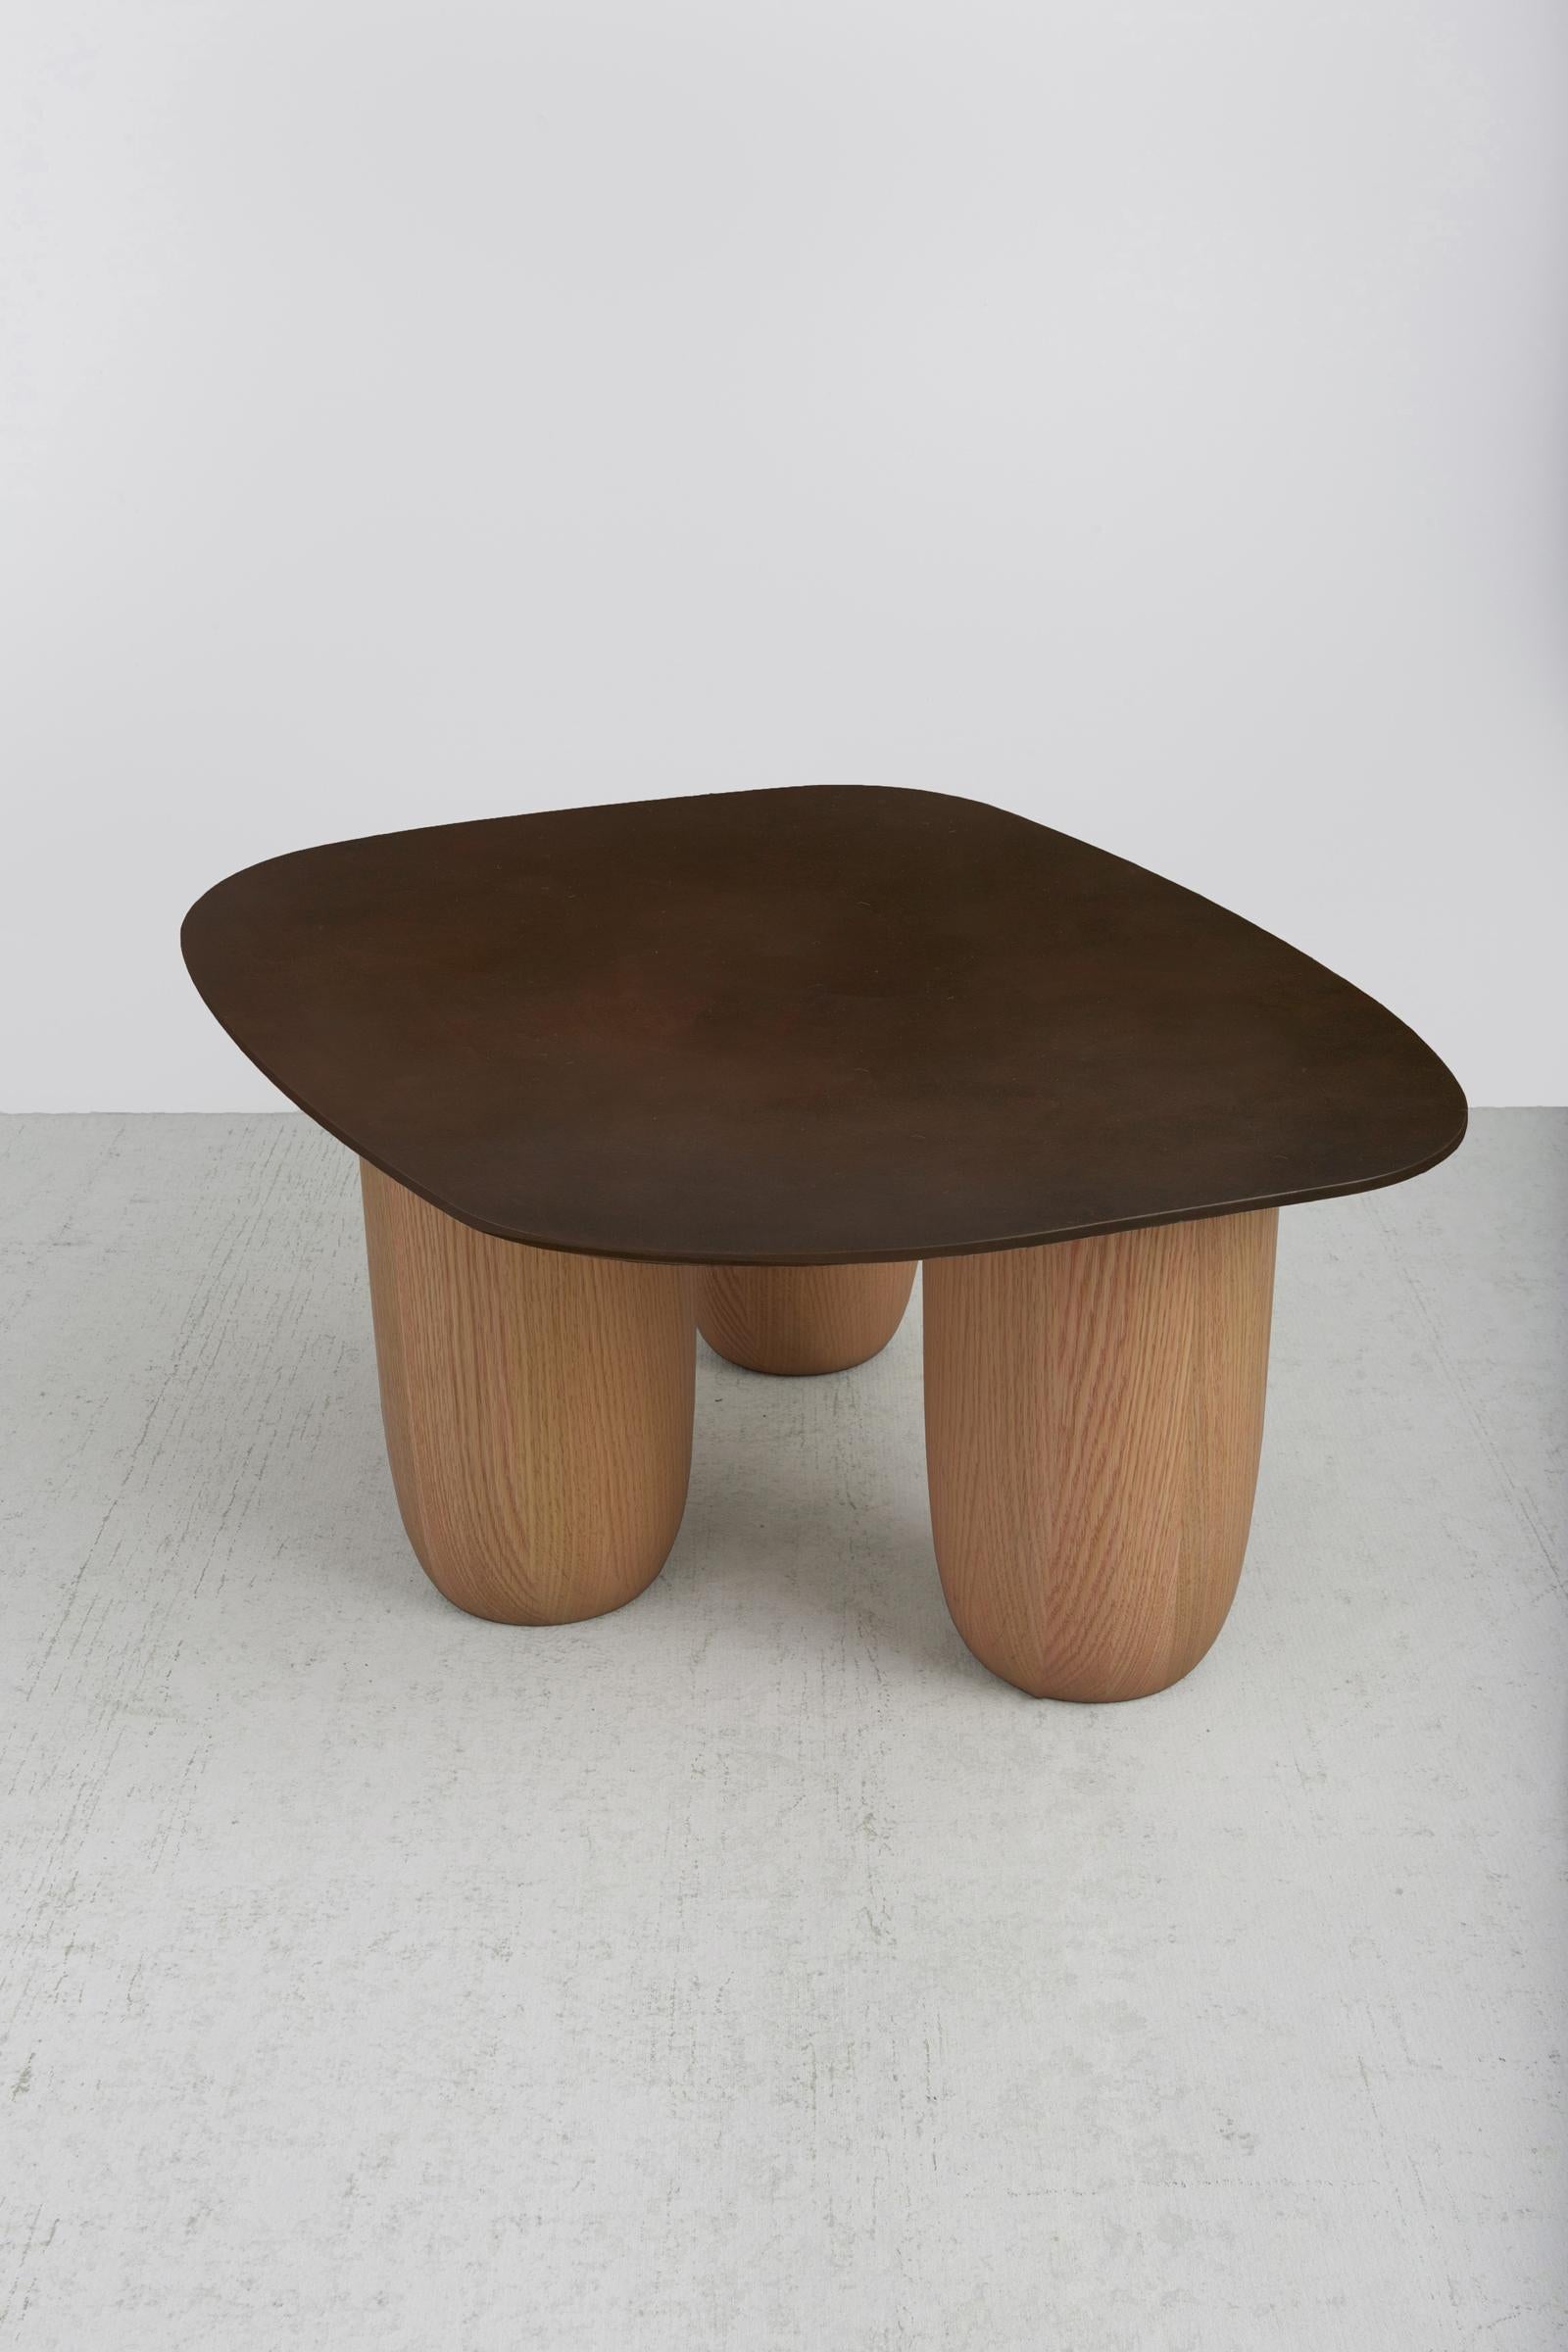 Minimalist Low Tables Japanese Brown Patina Steel with Oak Legs Vivian Carbonell In New Condition For Sale In Miami, FL